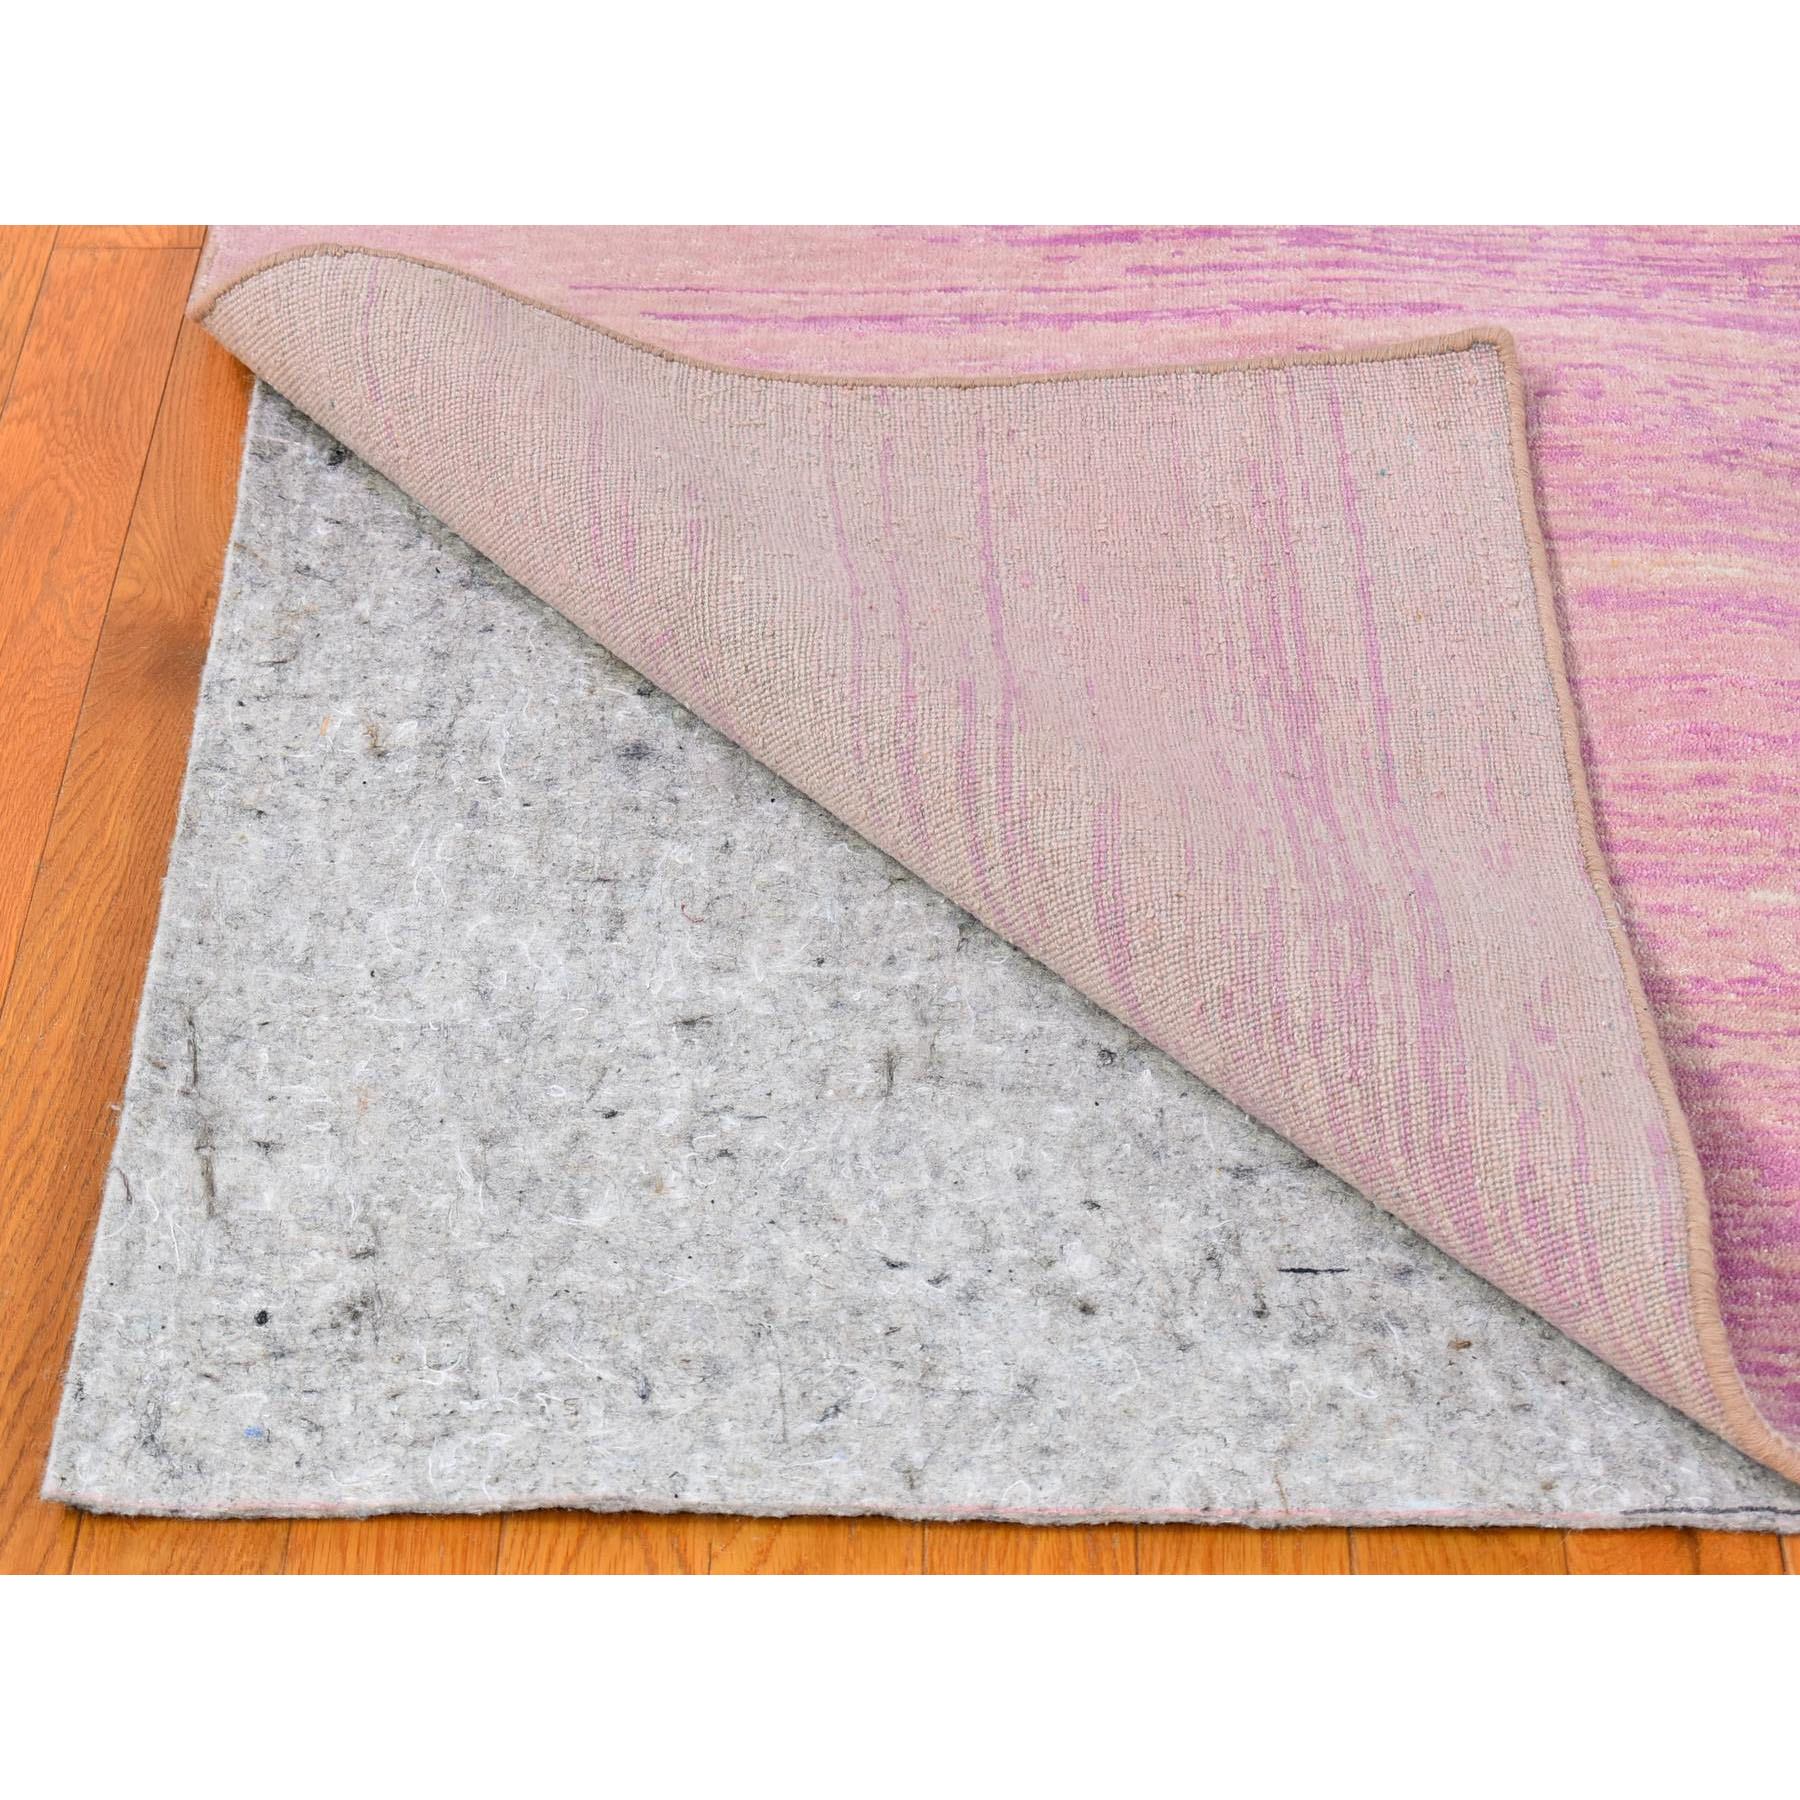 10'x14'2" Zero Pile Pure Wool Only Horizontal Ombre Design Pink with Touches of Ivory Hand Woven Oriental Rug 